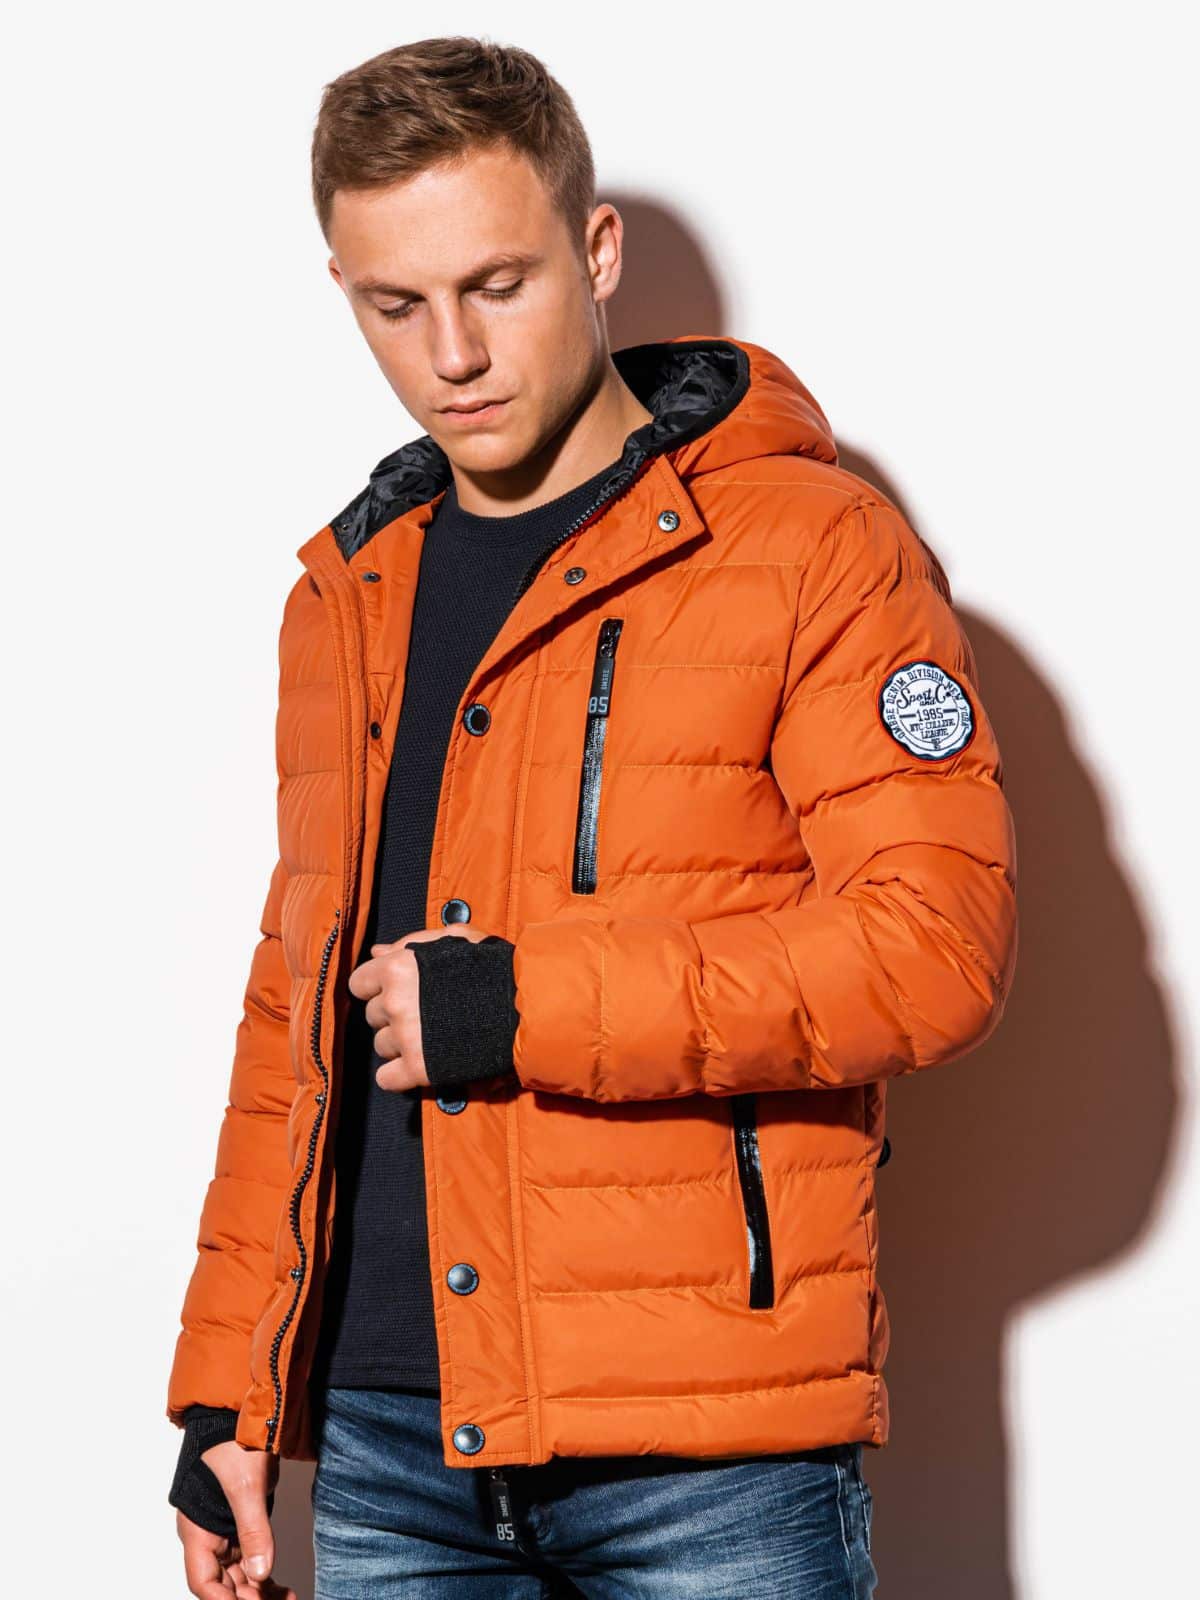 How To Wear Quilted Jackets For Men 3